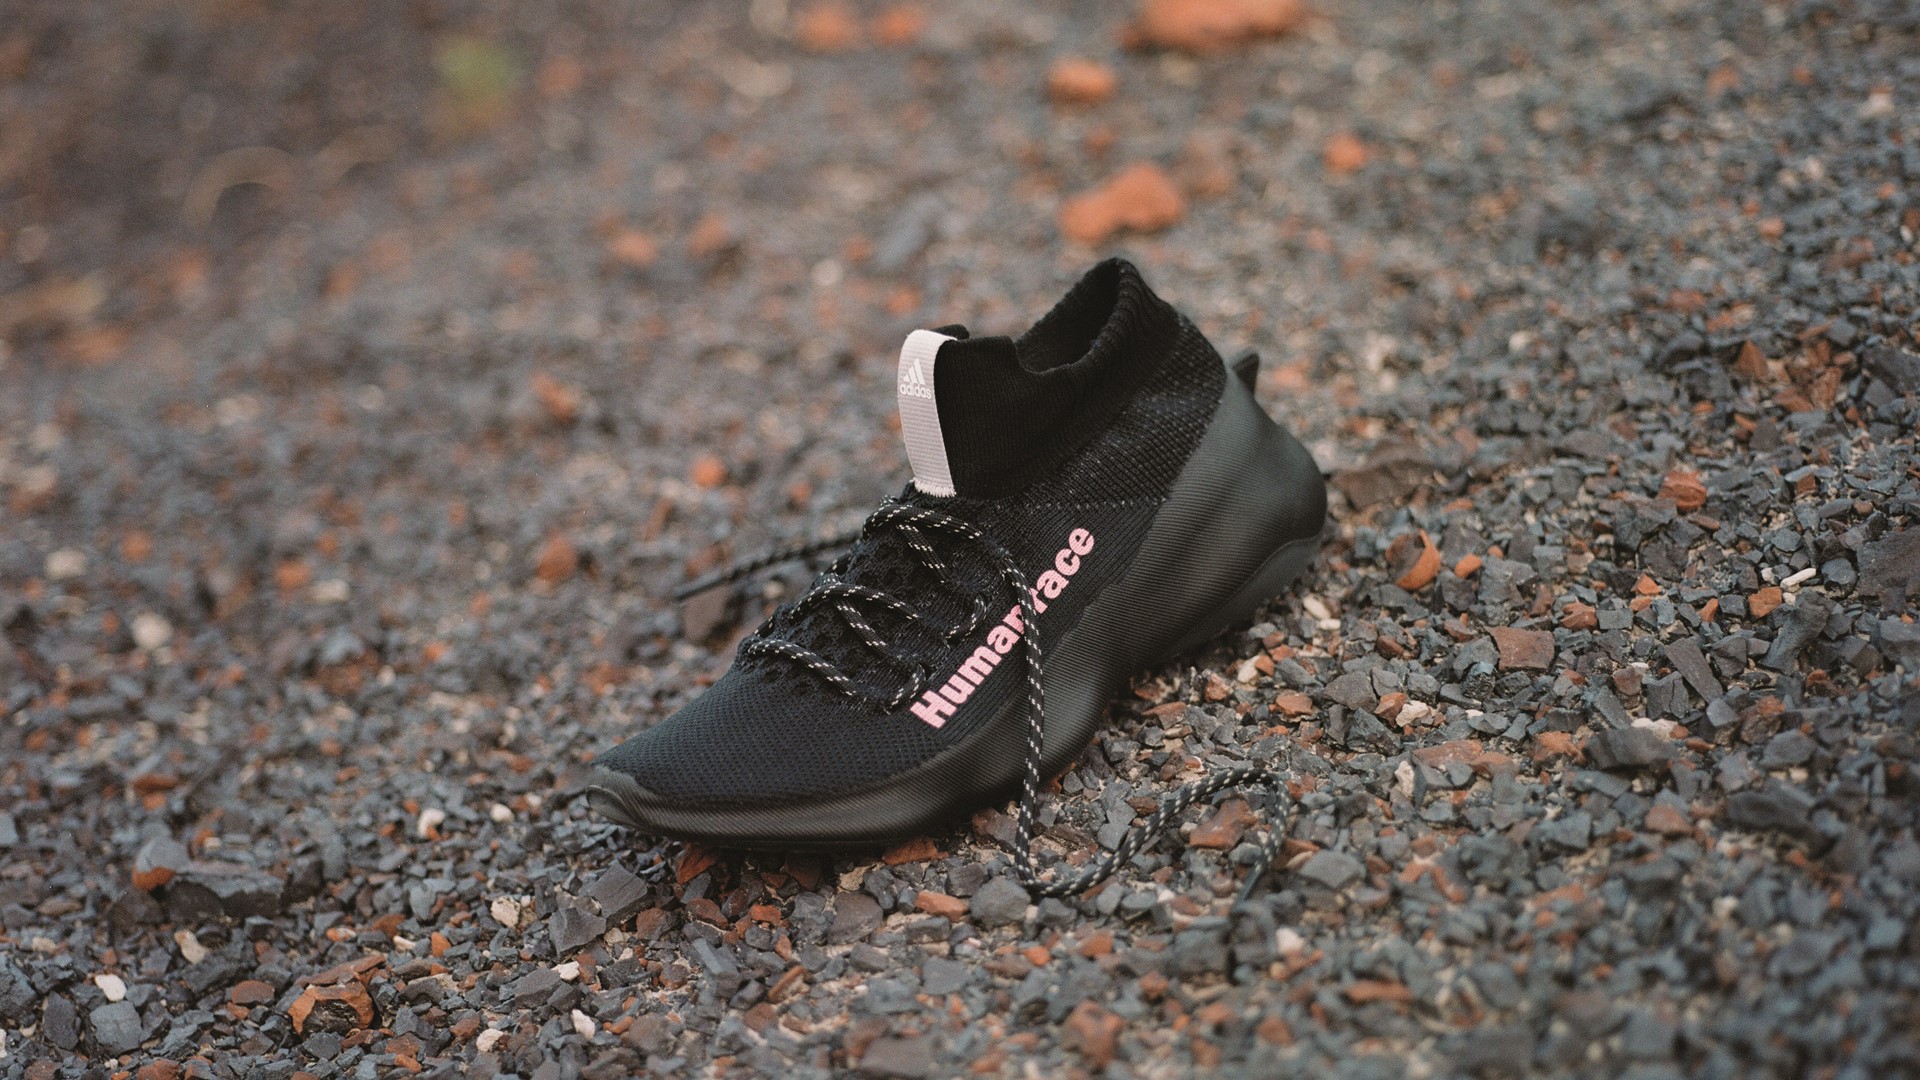 equilibrar Perforar Limitado adidas and Pharrell Williams Launch New Core Black Colorway of the  Humanrace Sičhona Silhouette